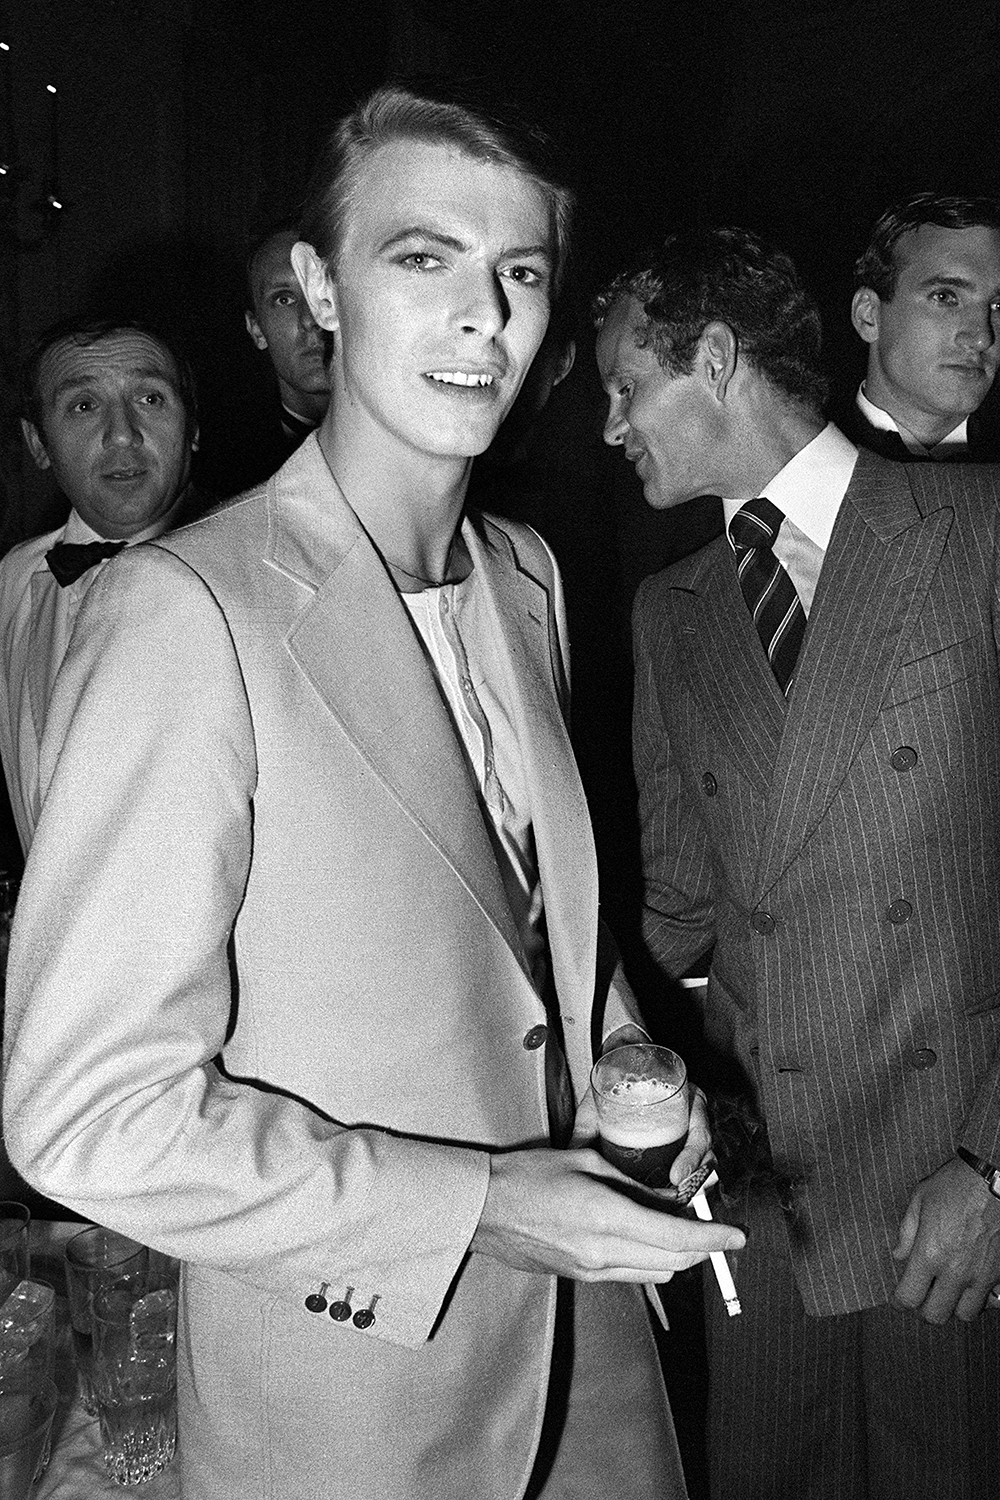 David Bowie at the 31st Cannes Film Festival in 1978.